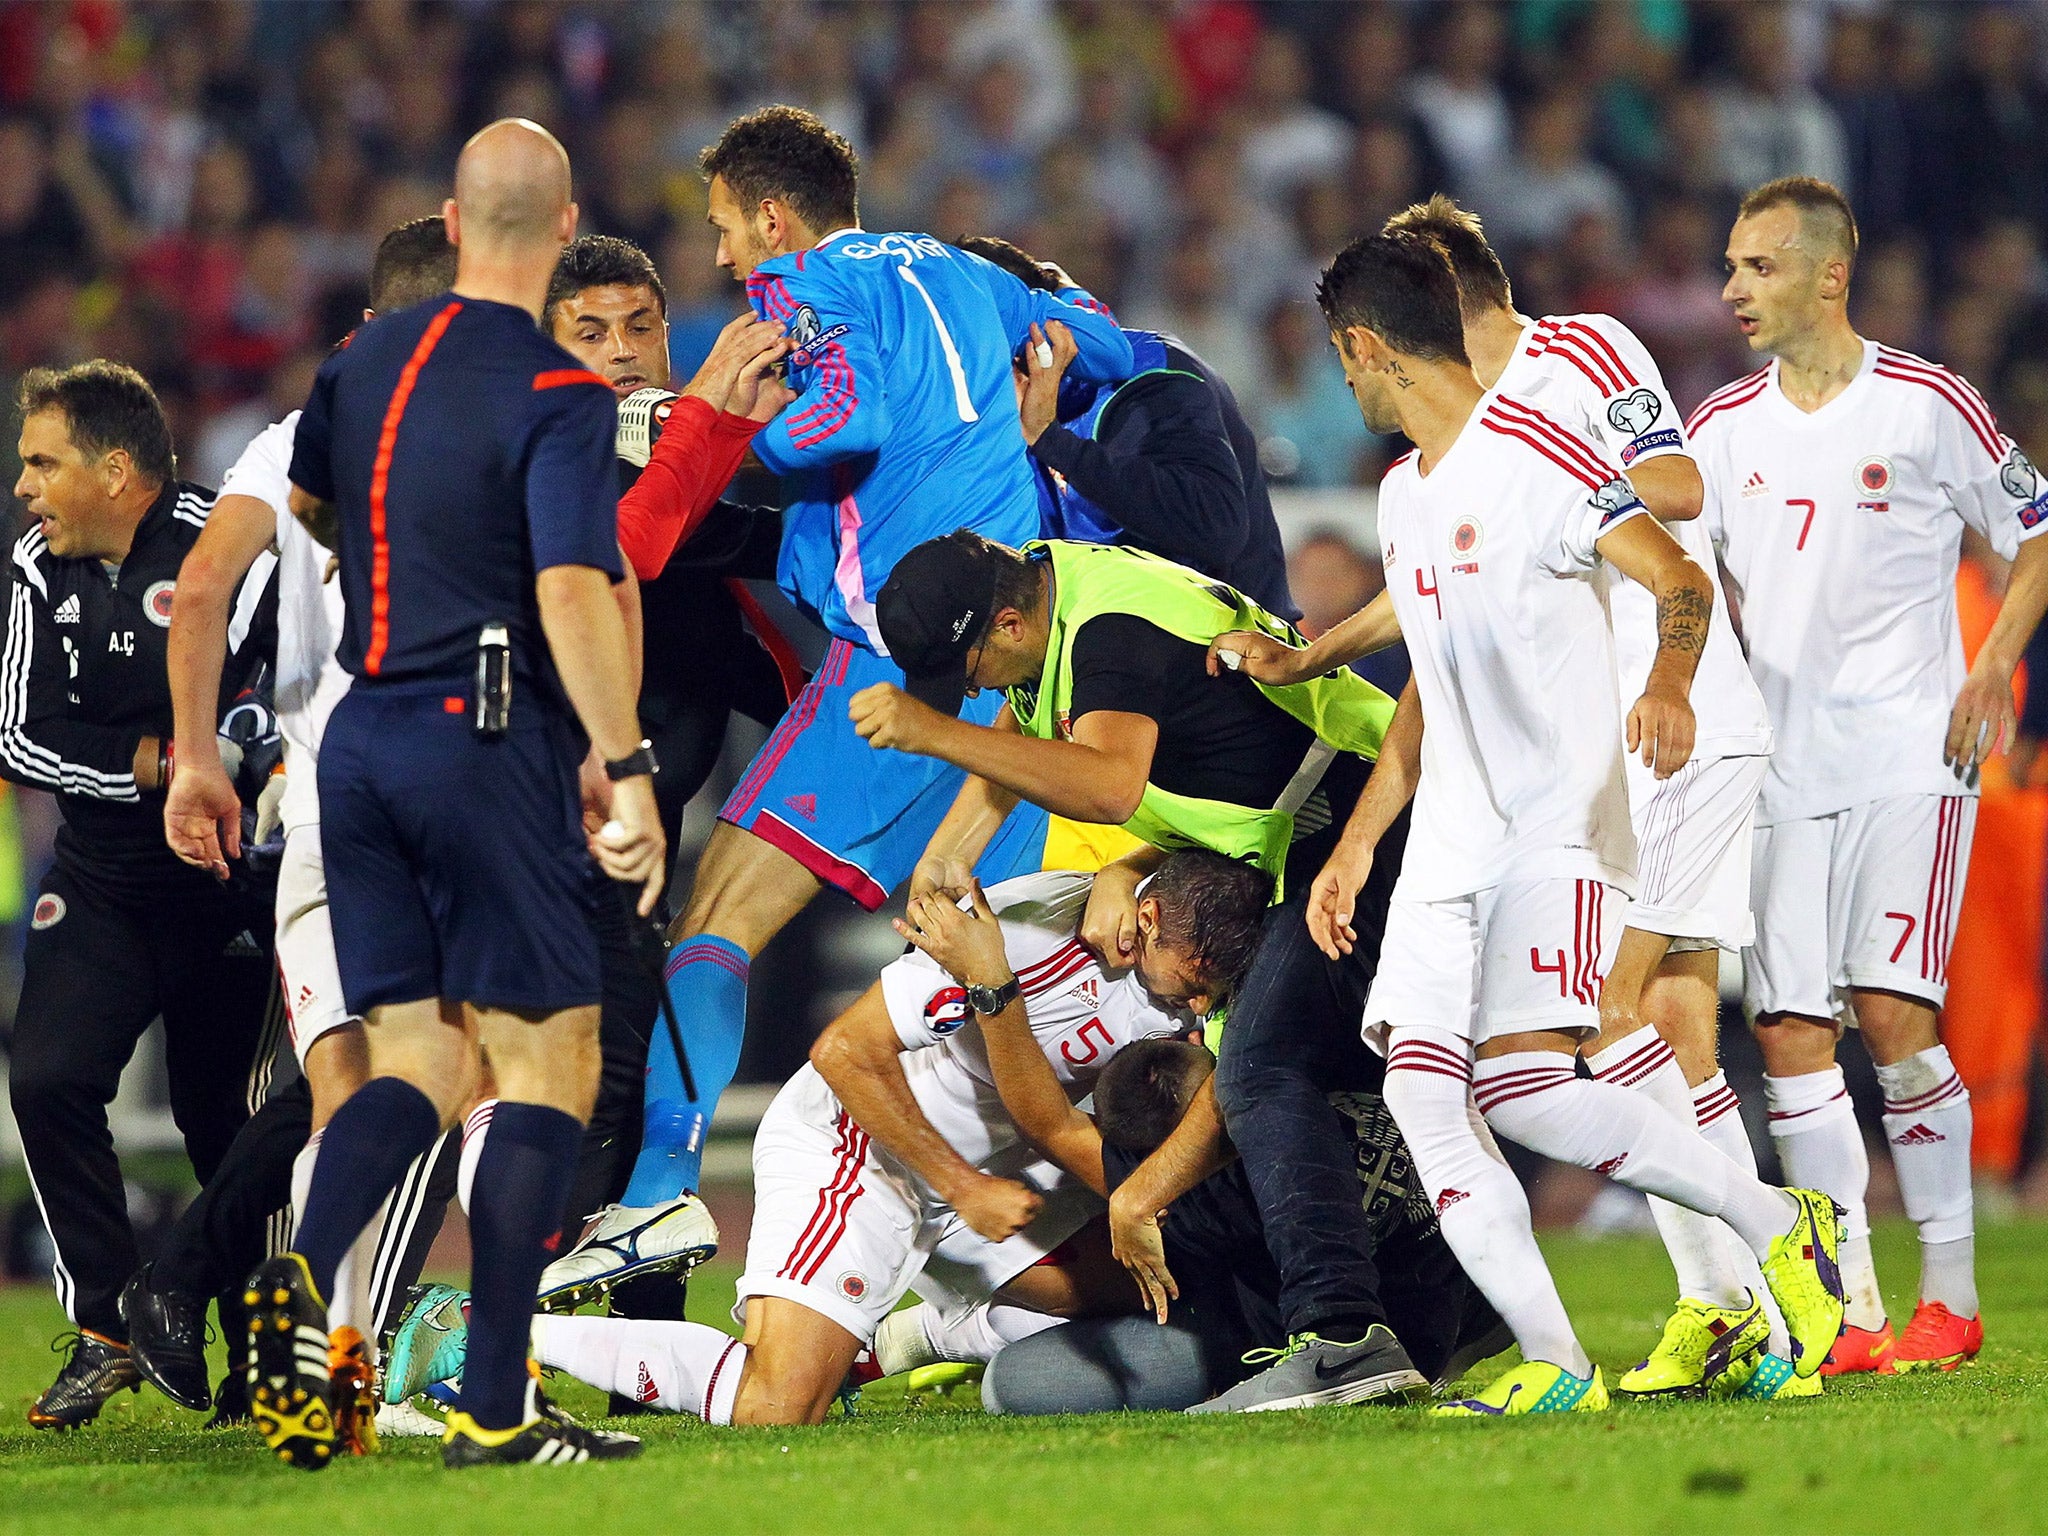 A brawl between players and supporters on the pitch before the match